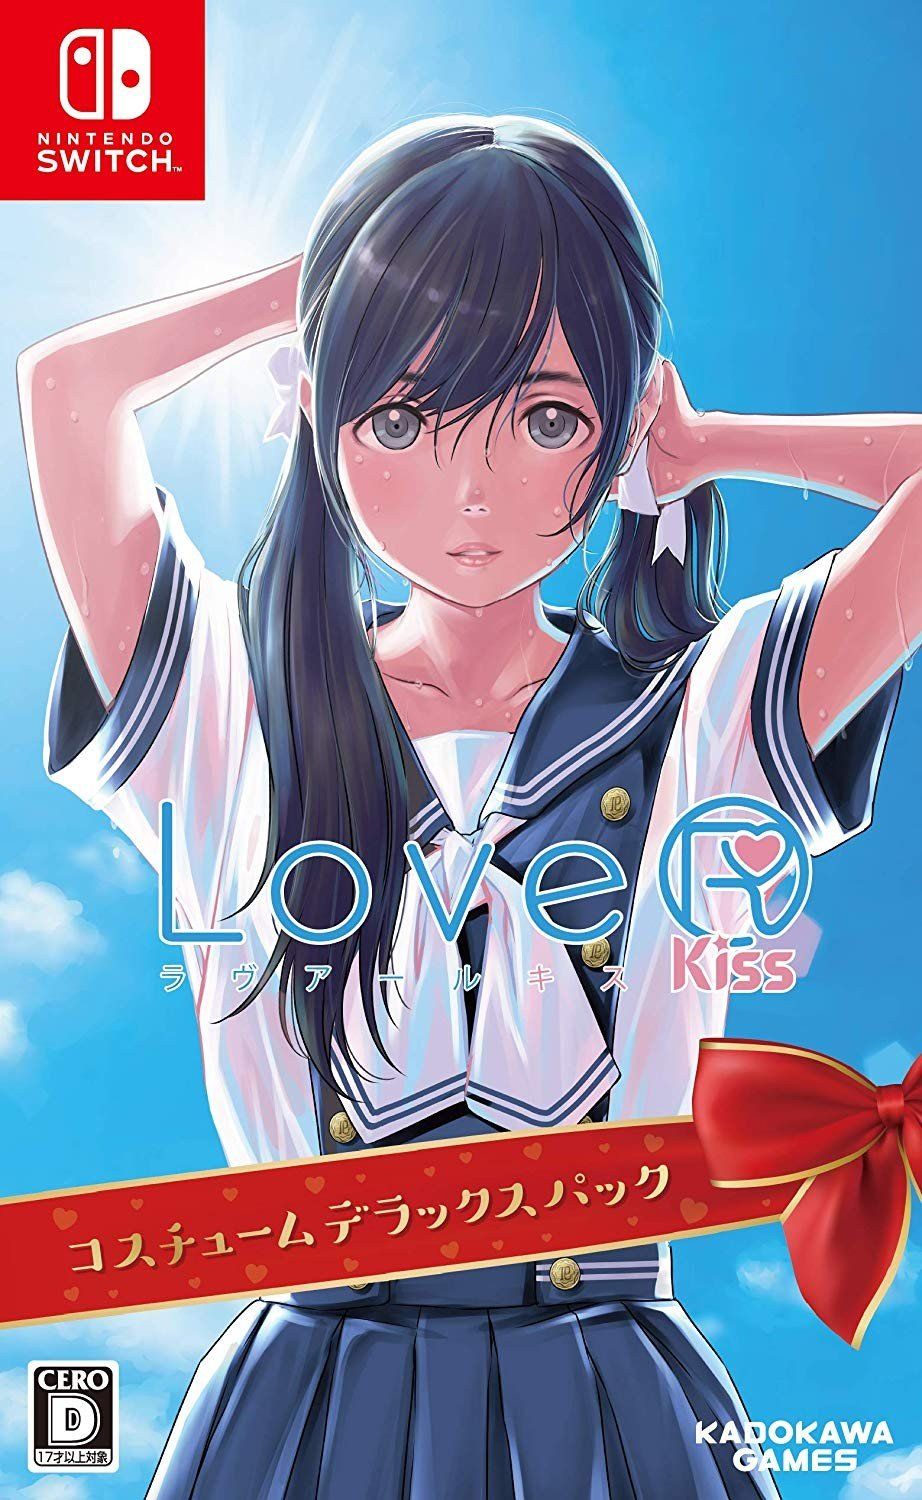 Father's Day Coupon! on "Oh nice, there's an awesome LoveR Kiss Costume Deluxe Pack dating-sim game Nintendo Switch. Do you want to order a copy? https://t.co/spSWOoaDou https://t.co/2R1NwaBlcO" / Twitter